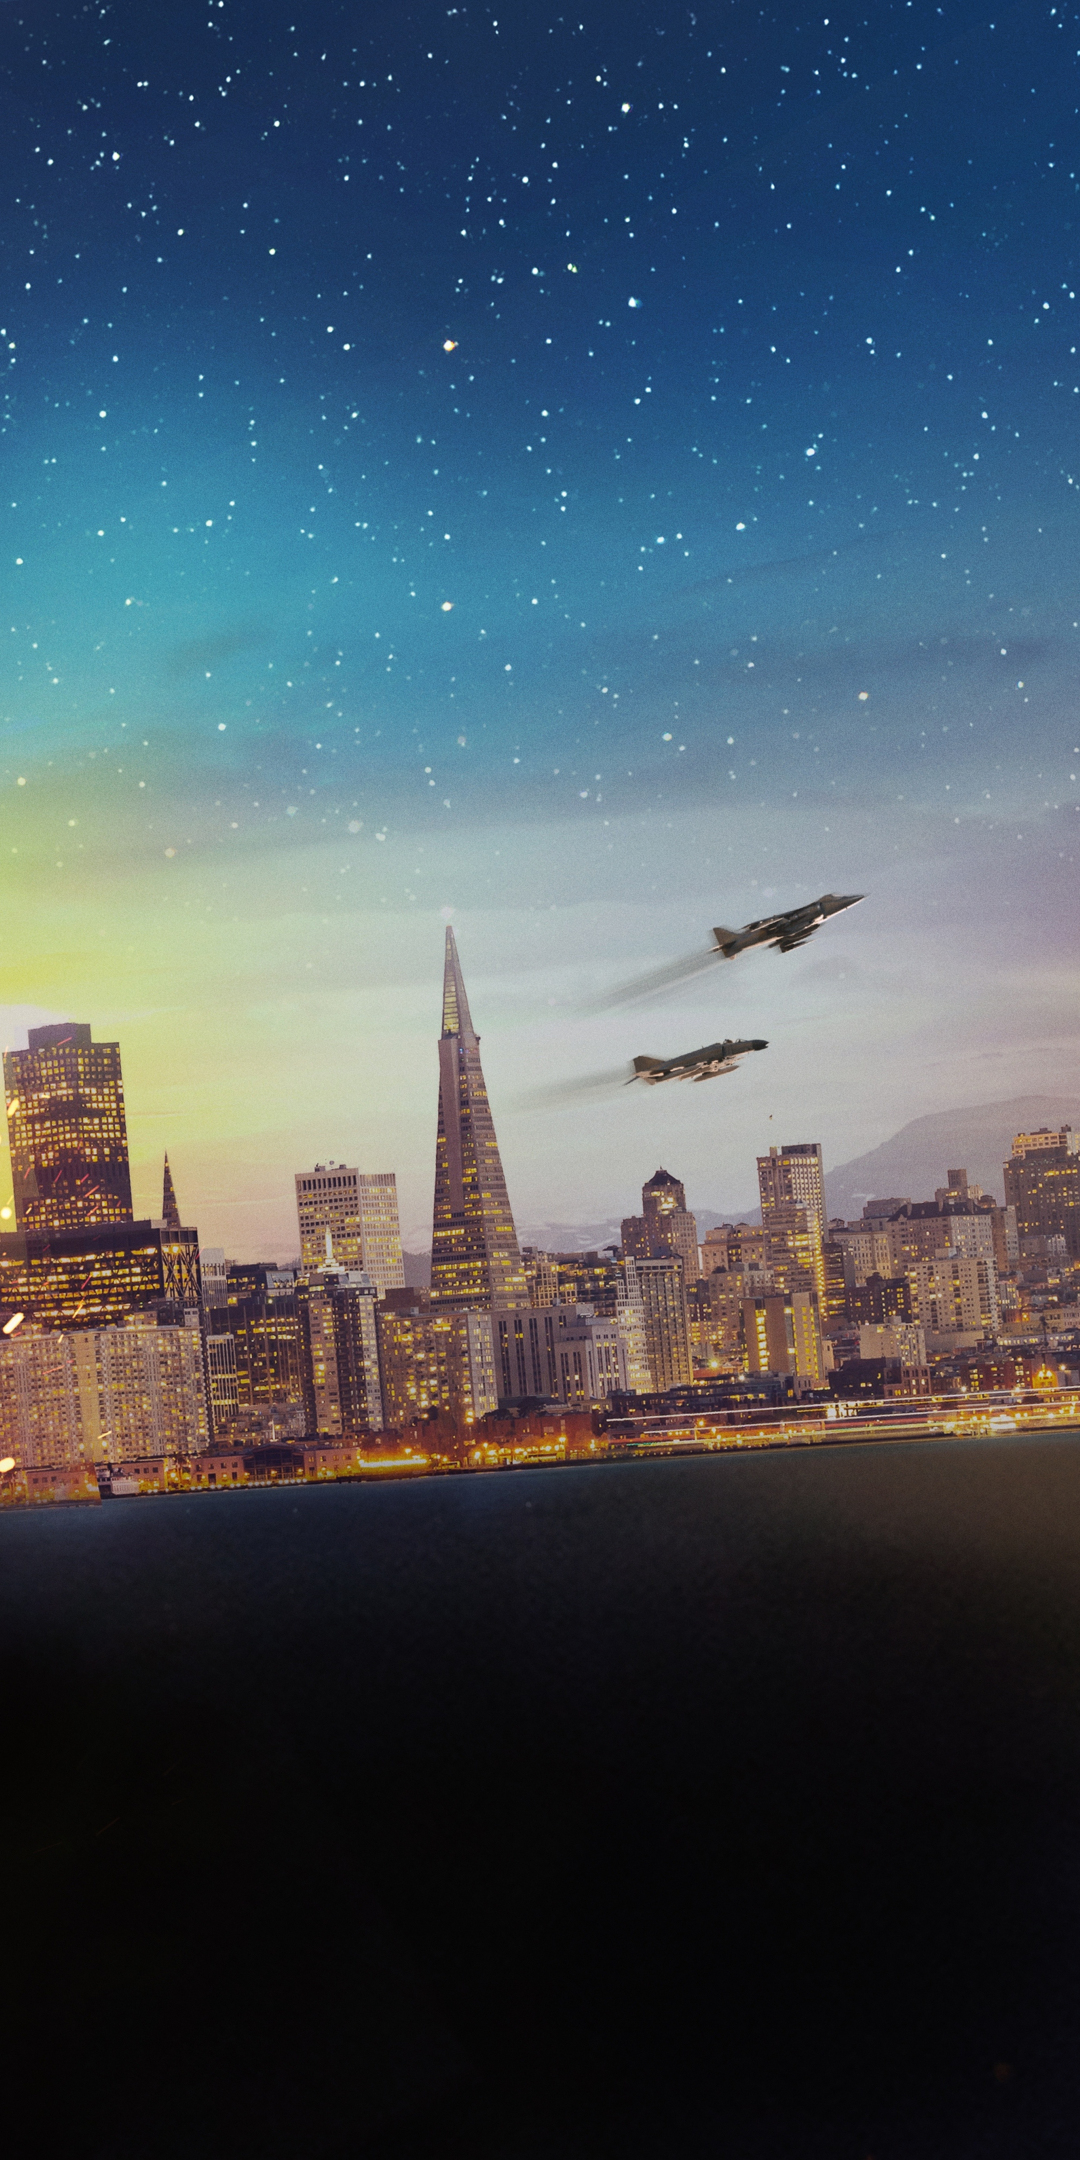 City, buildings, starry sky, aircrafts, 1080x2160 wallpaper